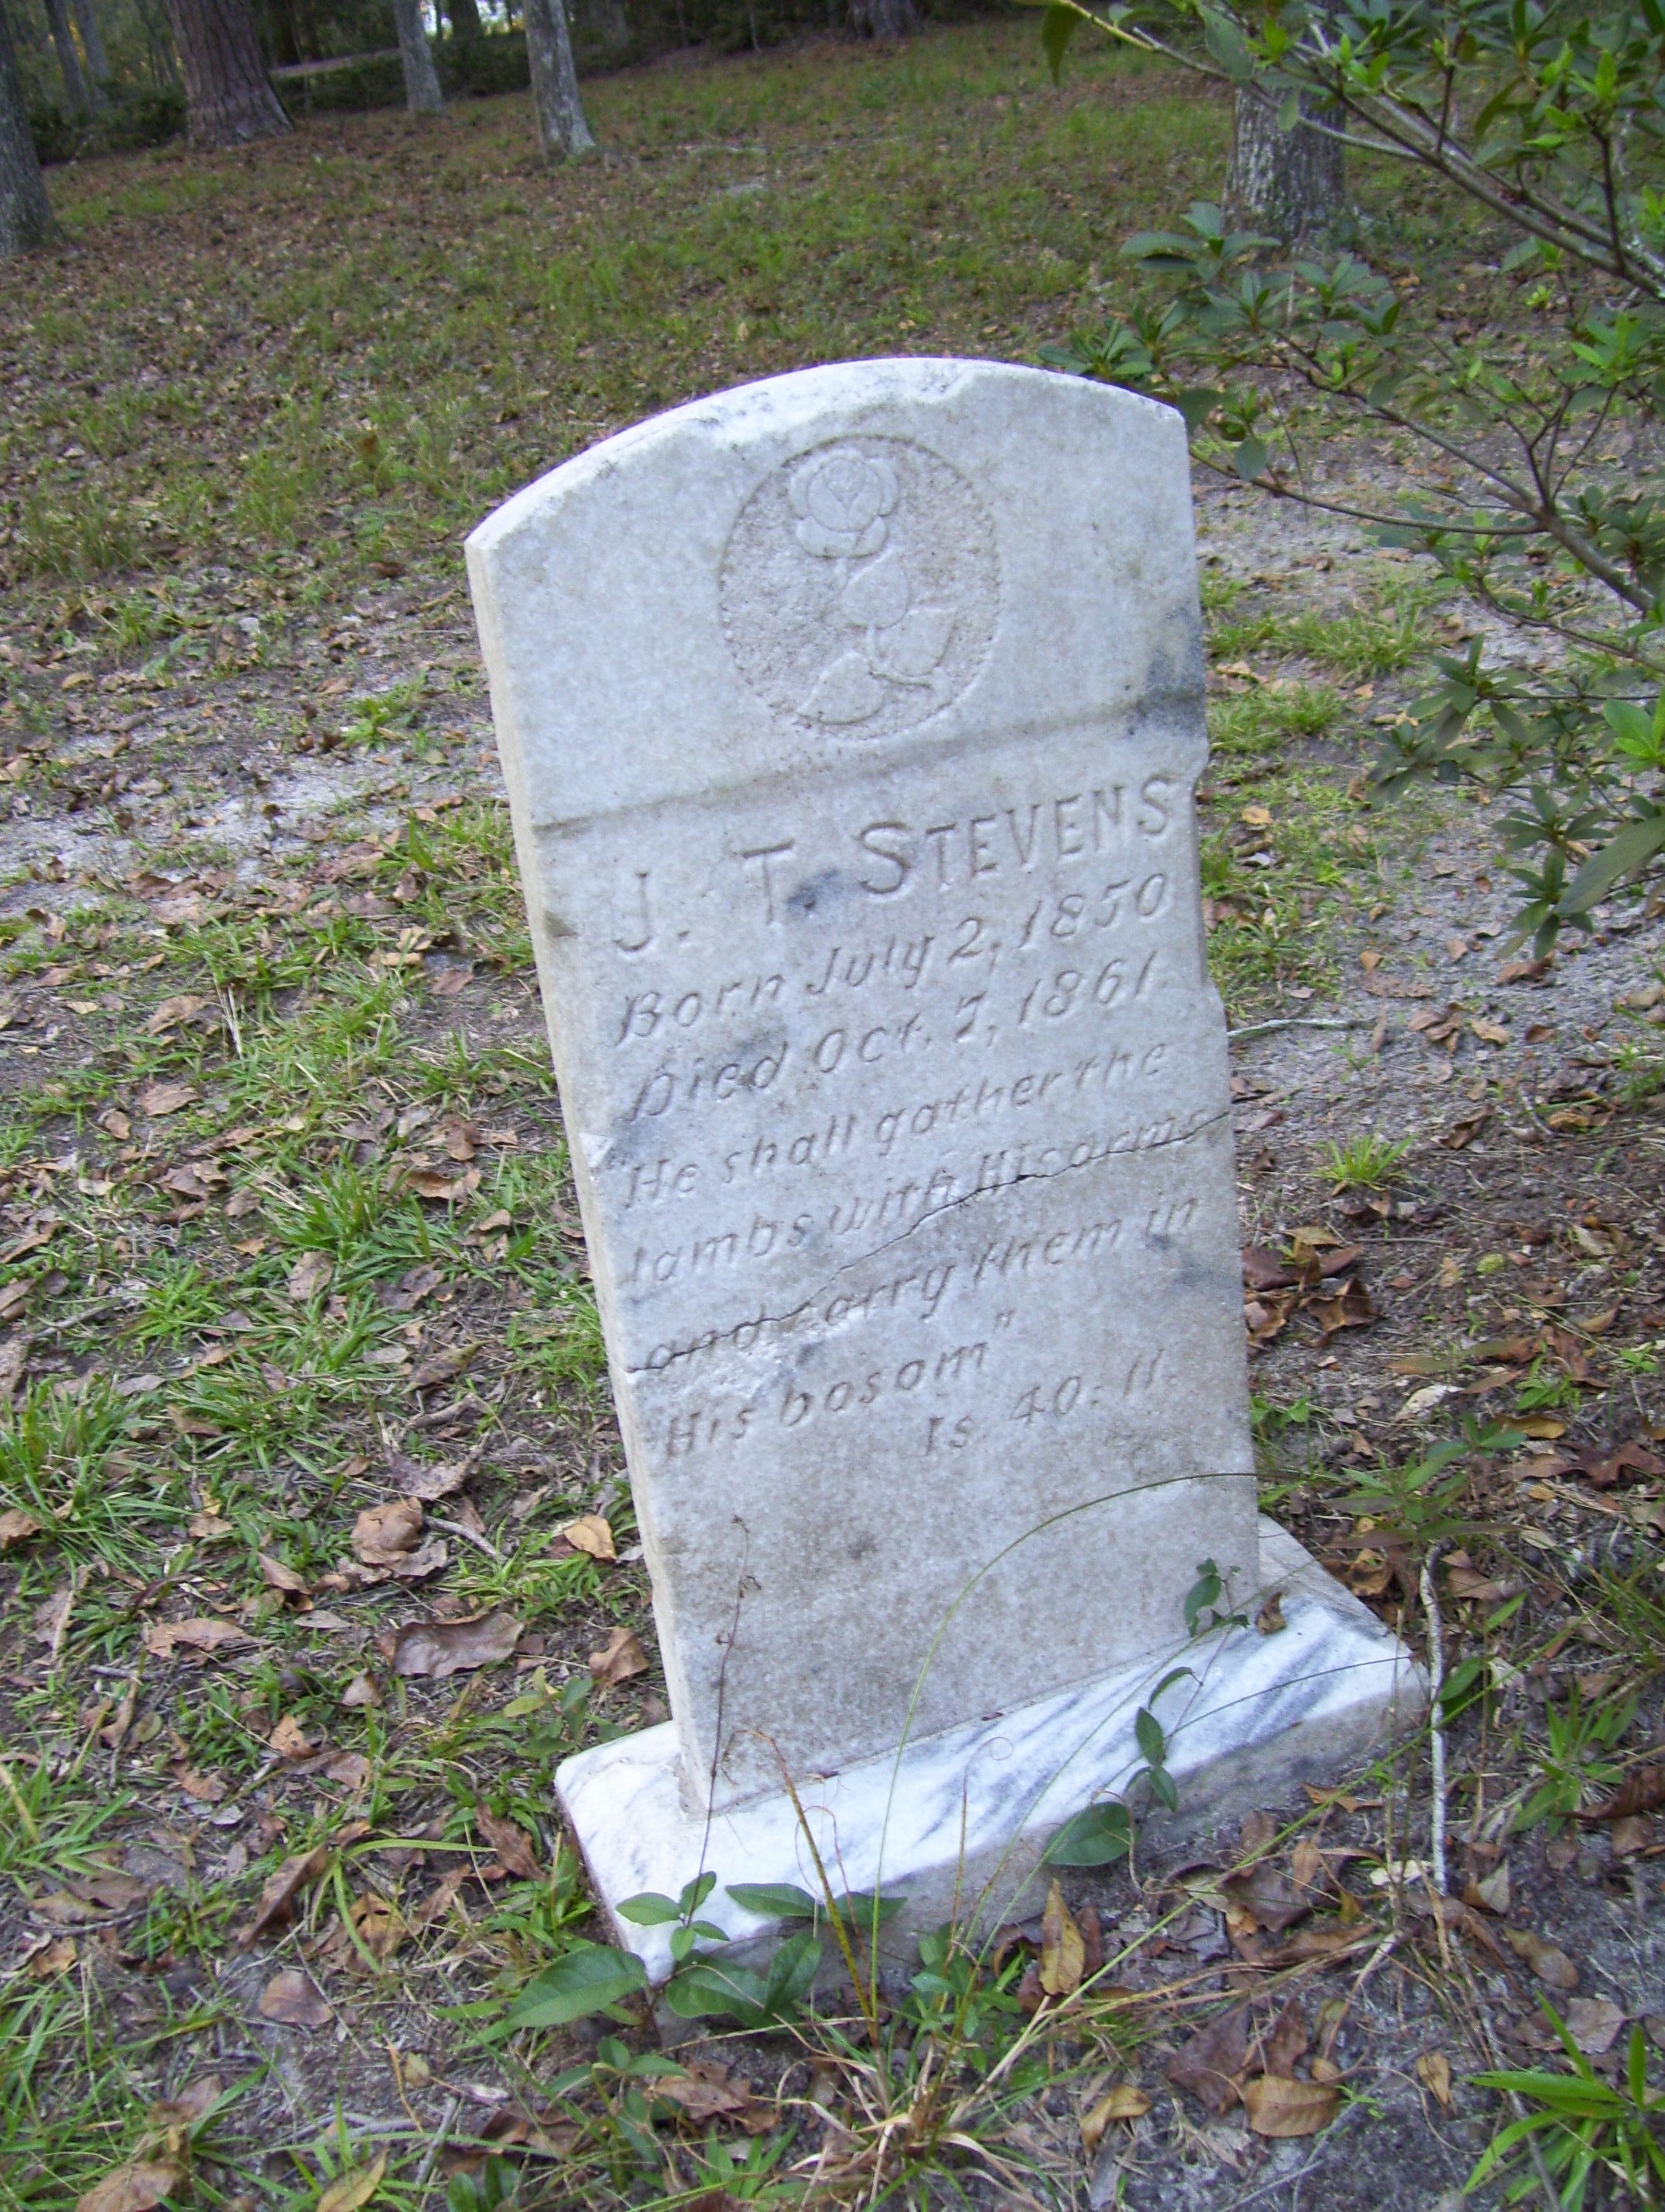   J. T. S TEVENS    Born July 2, 1850   Died October 1, 1861     “He shall gather the   lambs with His arms   and carry them in   His bosom.”   Is. 40:11.  